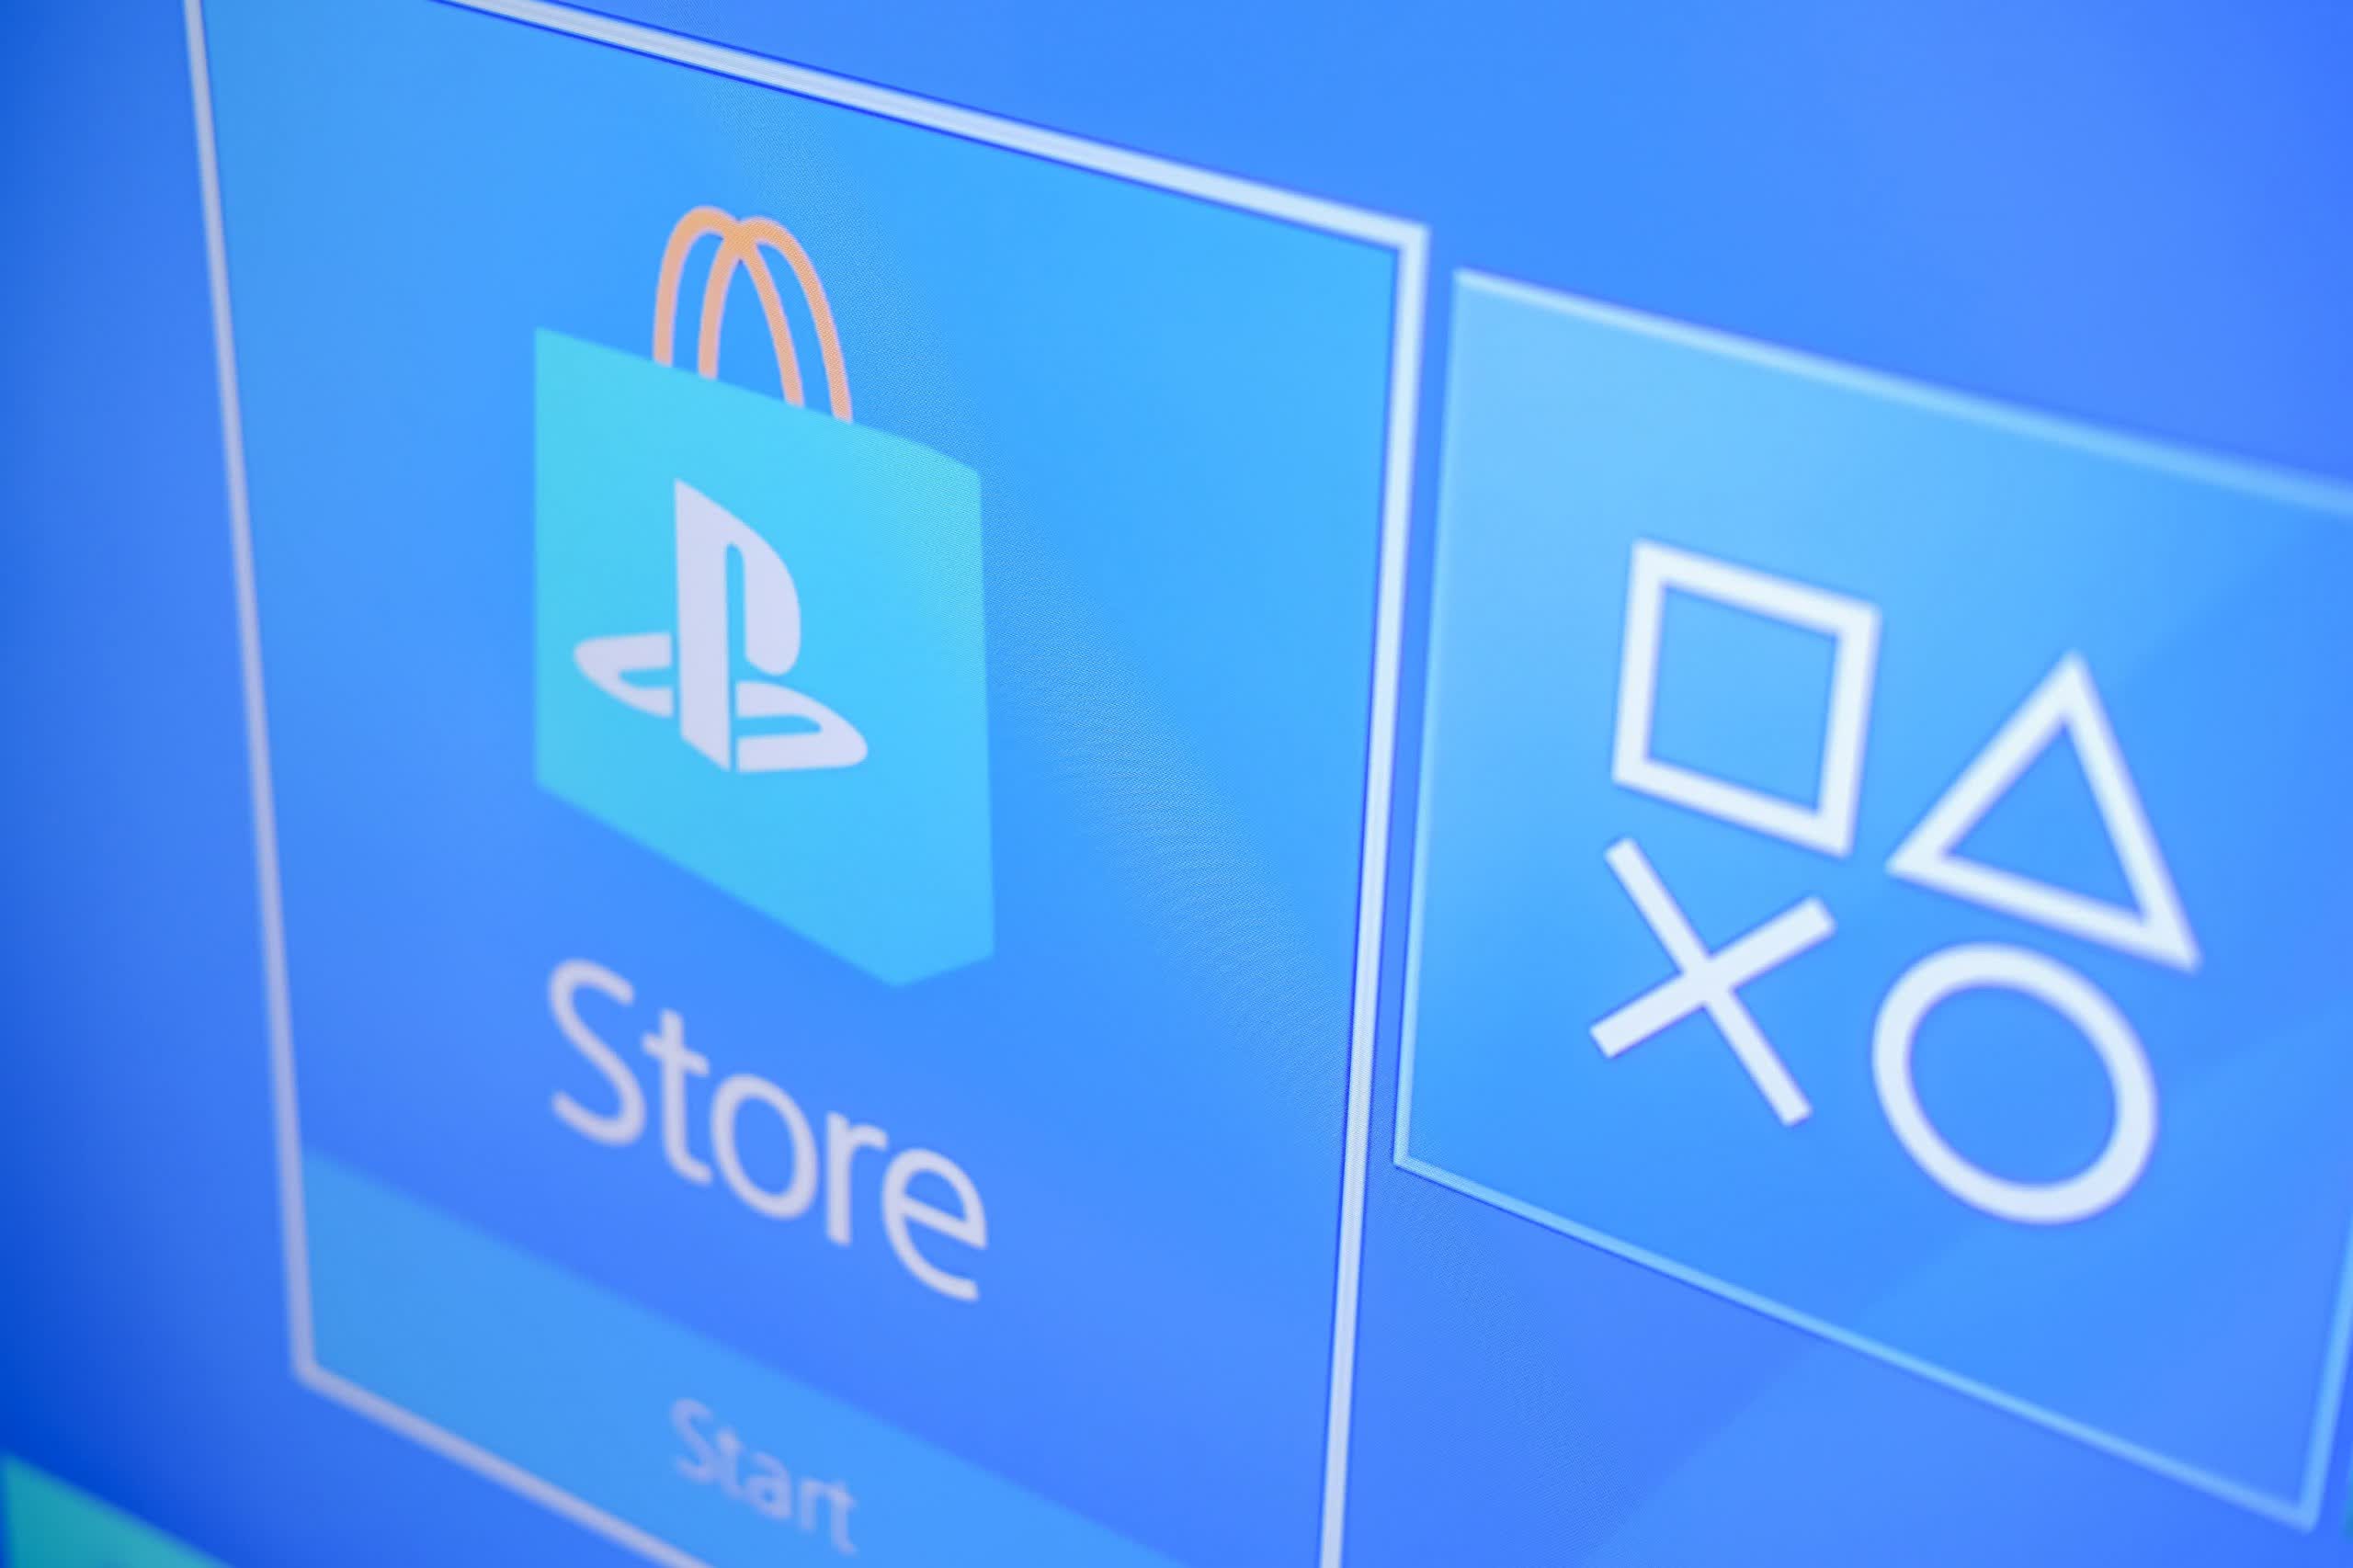 Sony is removing payment options from the PS3 and Vita stores this month